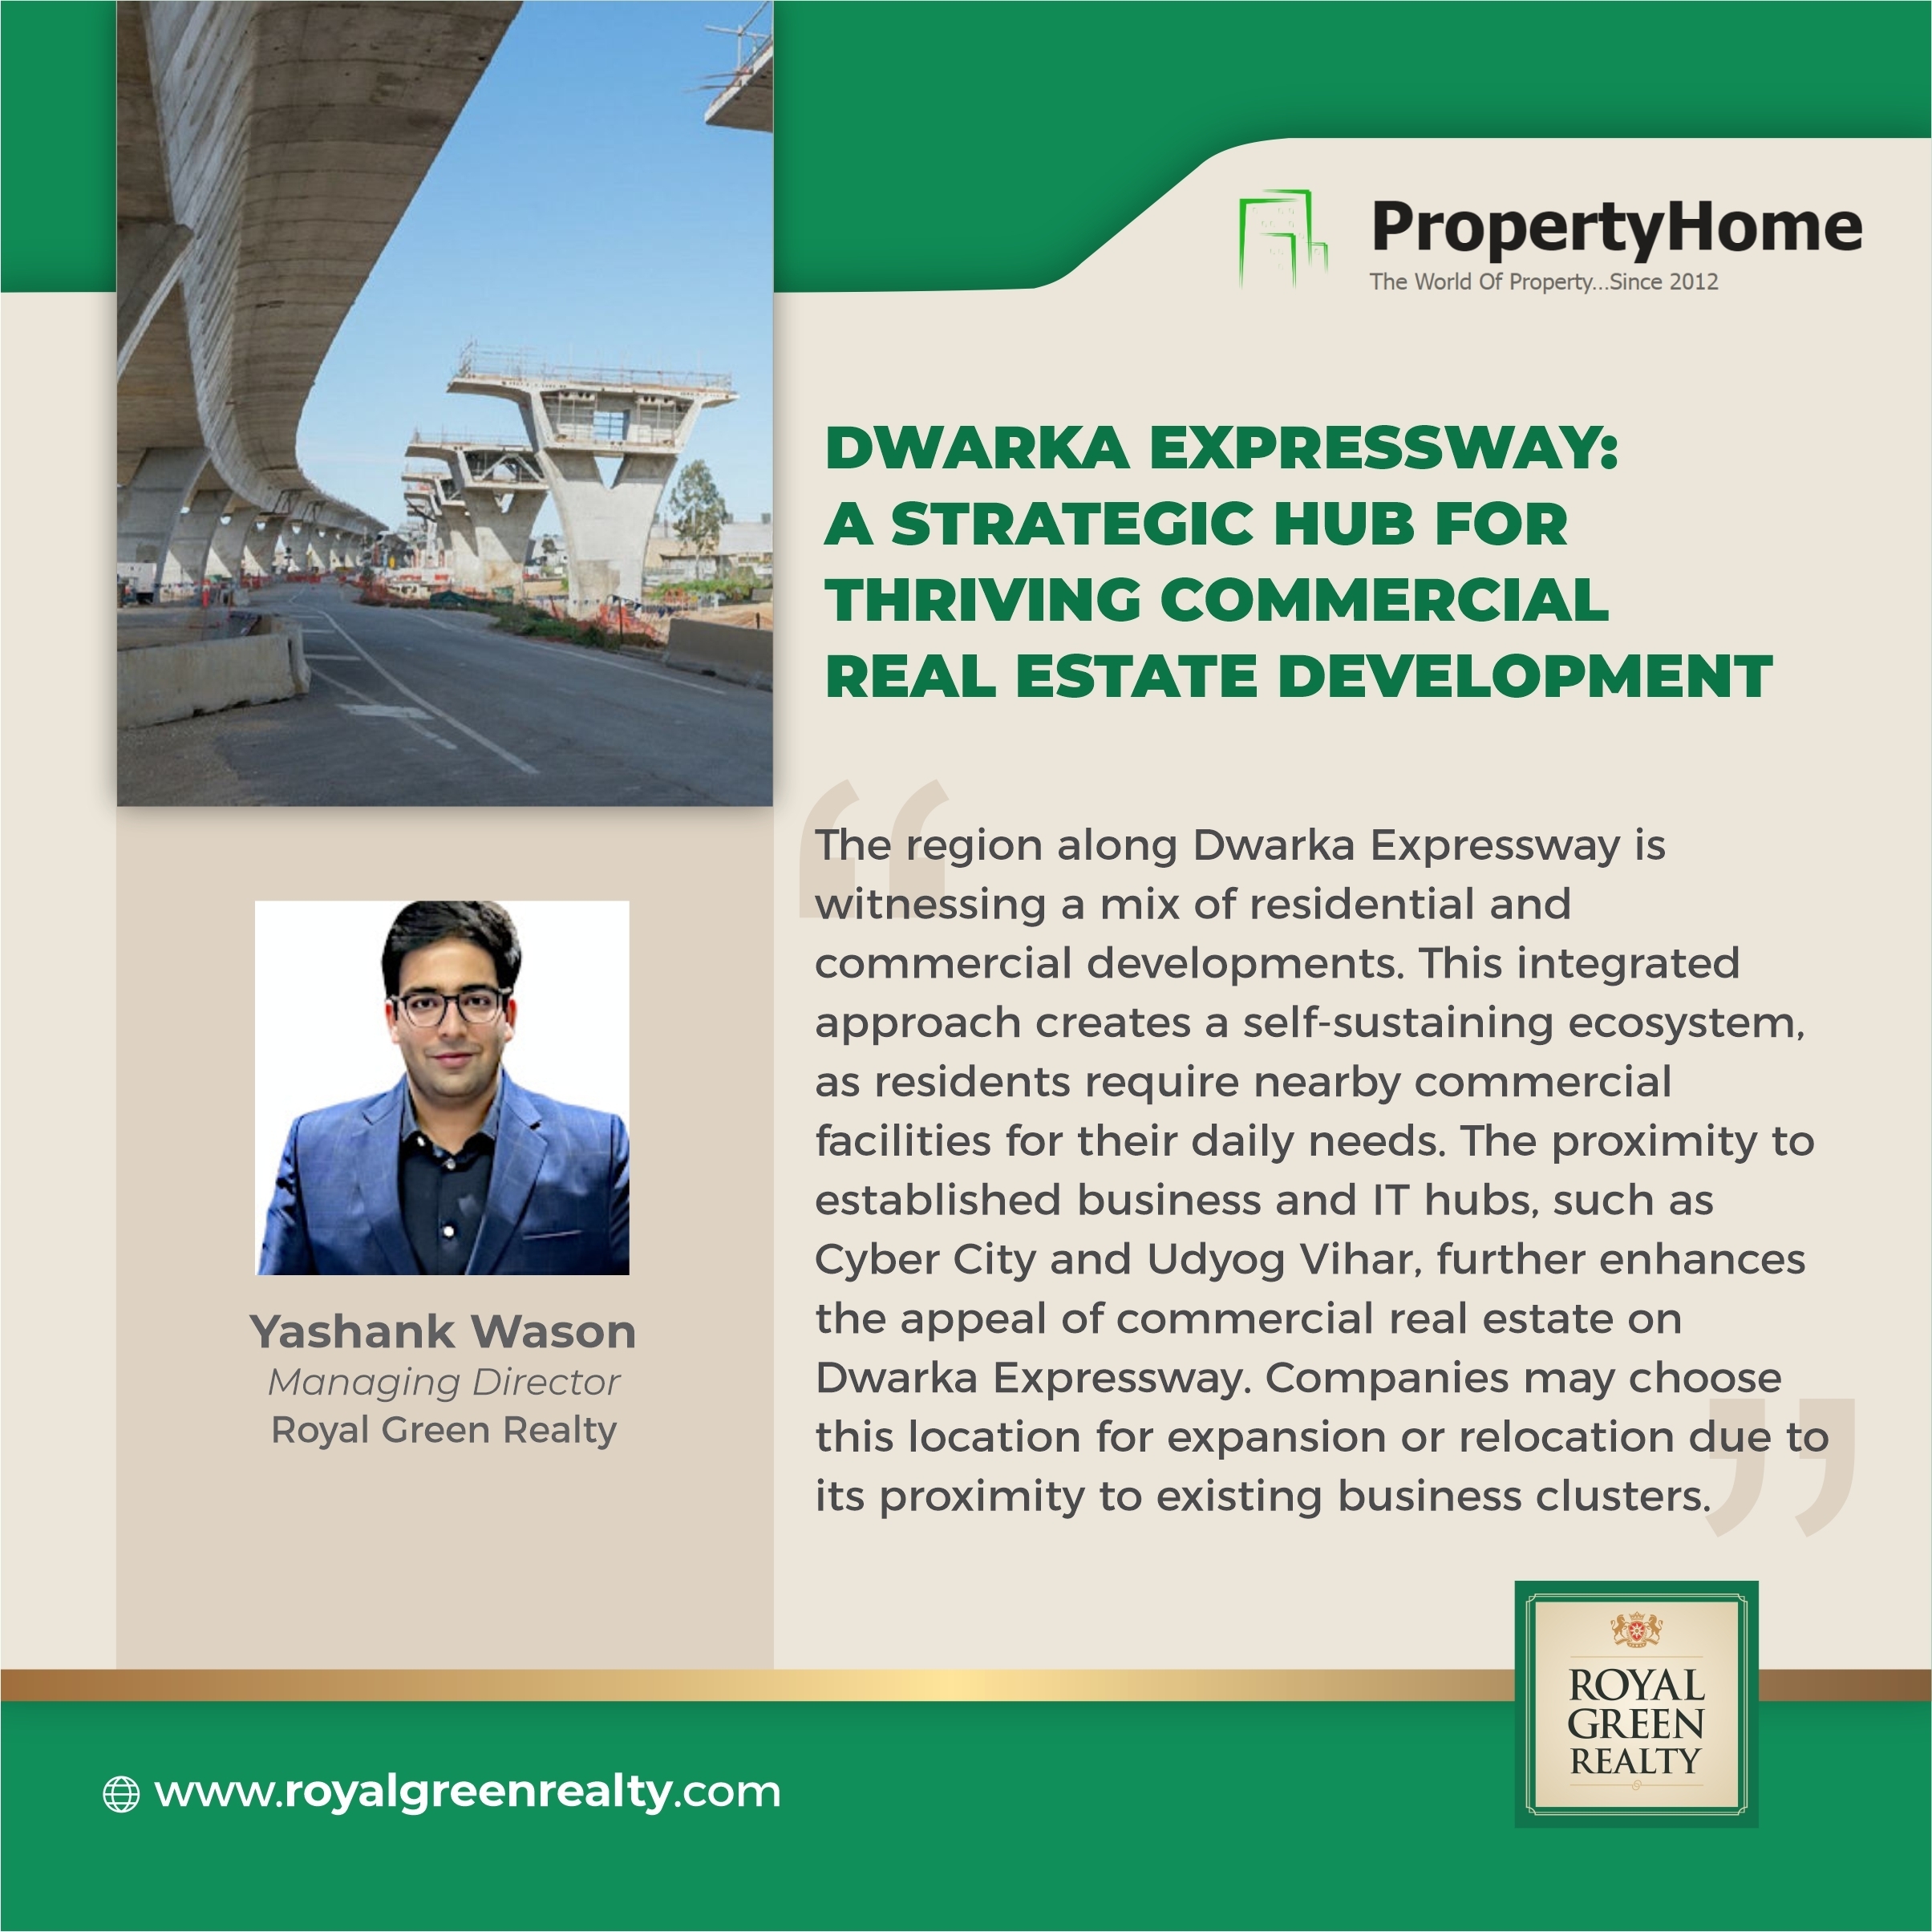 Dwarka Expressway: A Strategic Hub For Thriving Commercial Real Estate Development